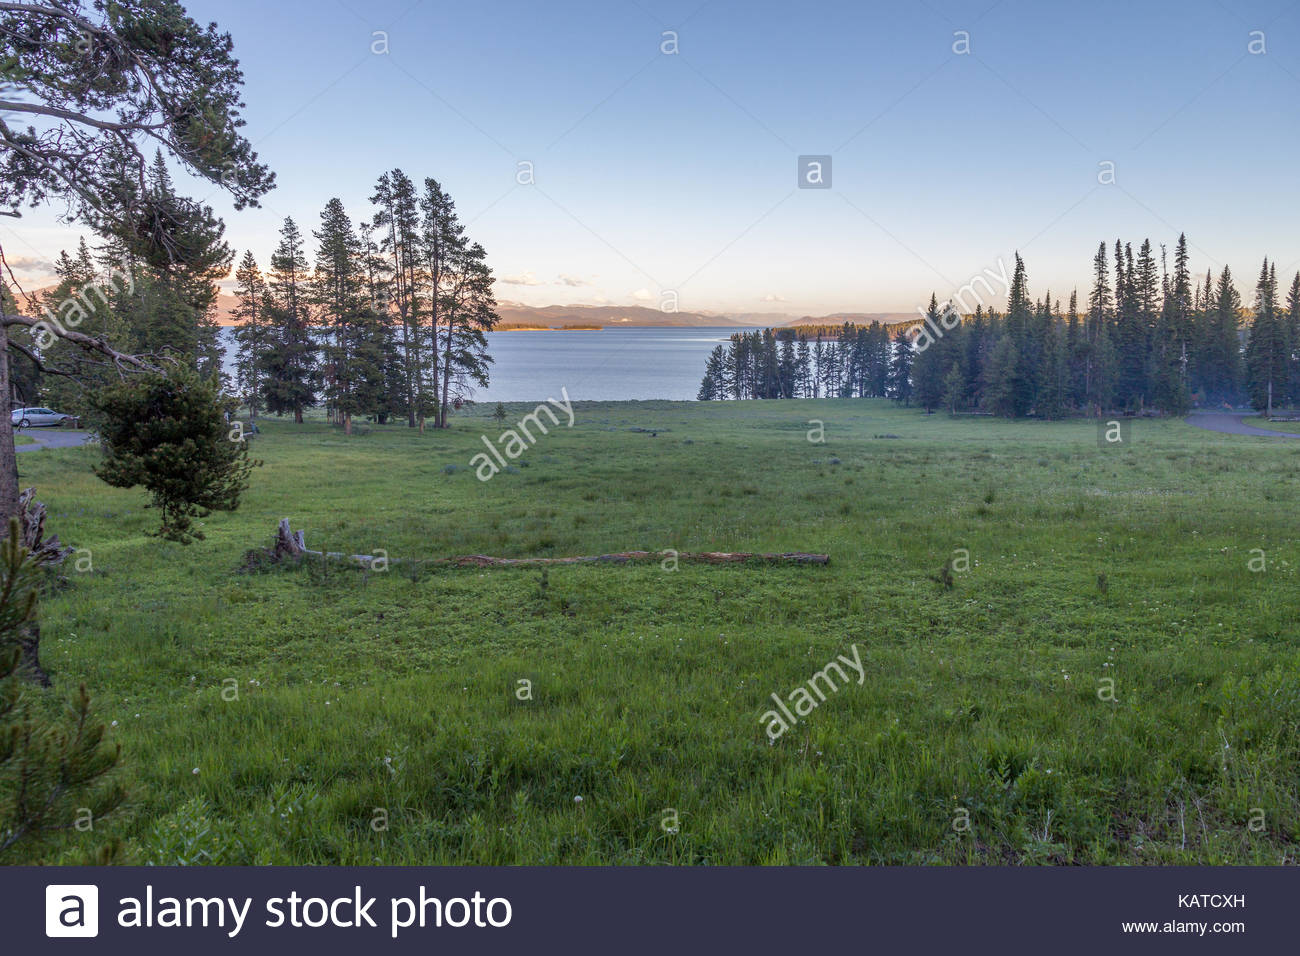 Peaceful Sunset With Yellowstone Lake In The Background